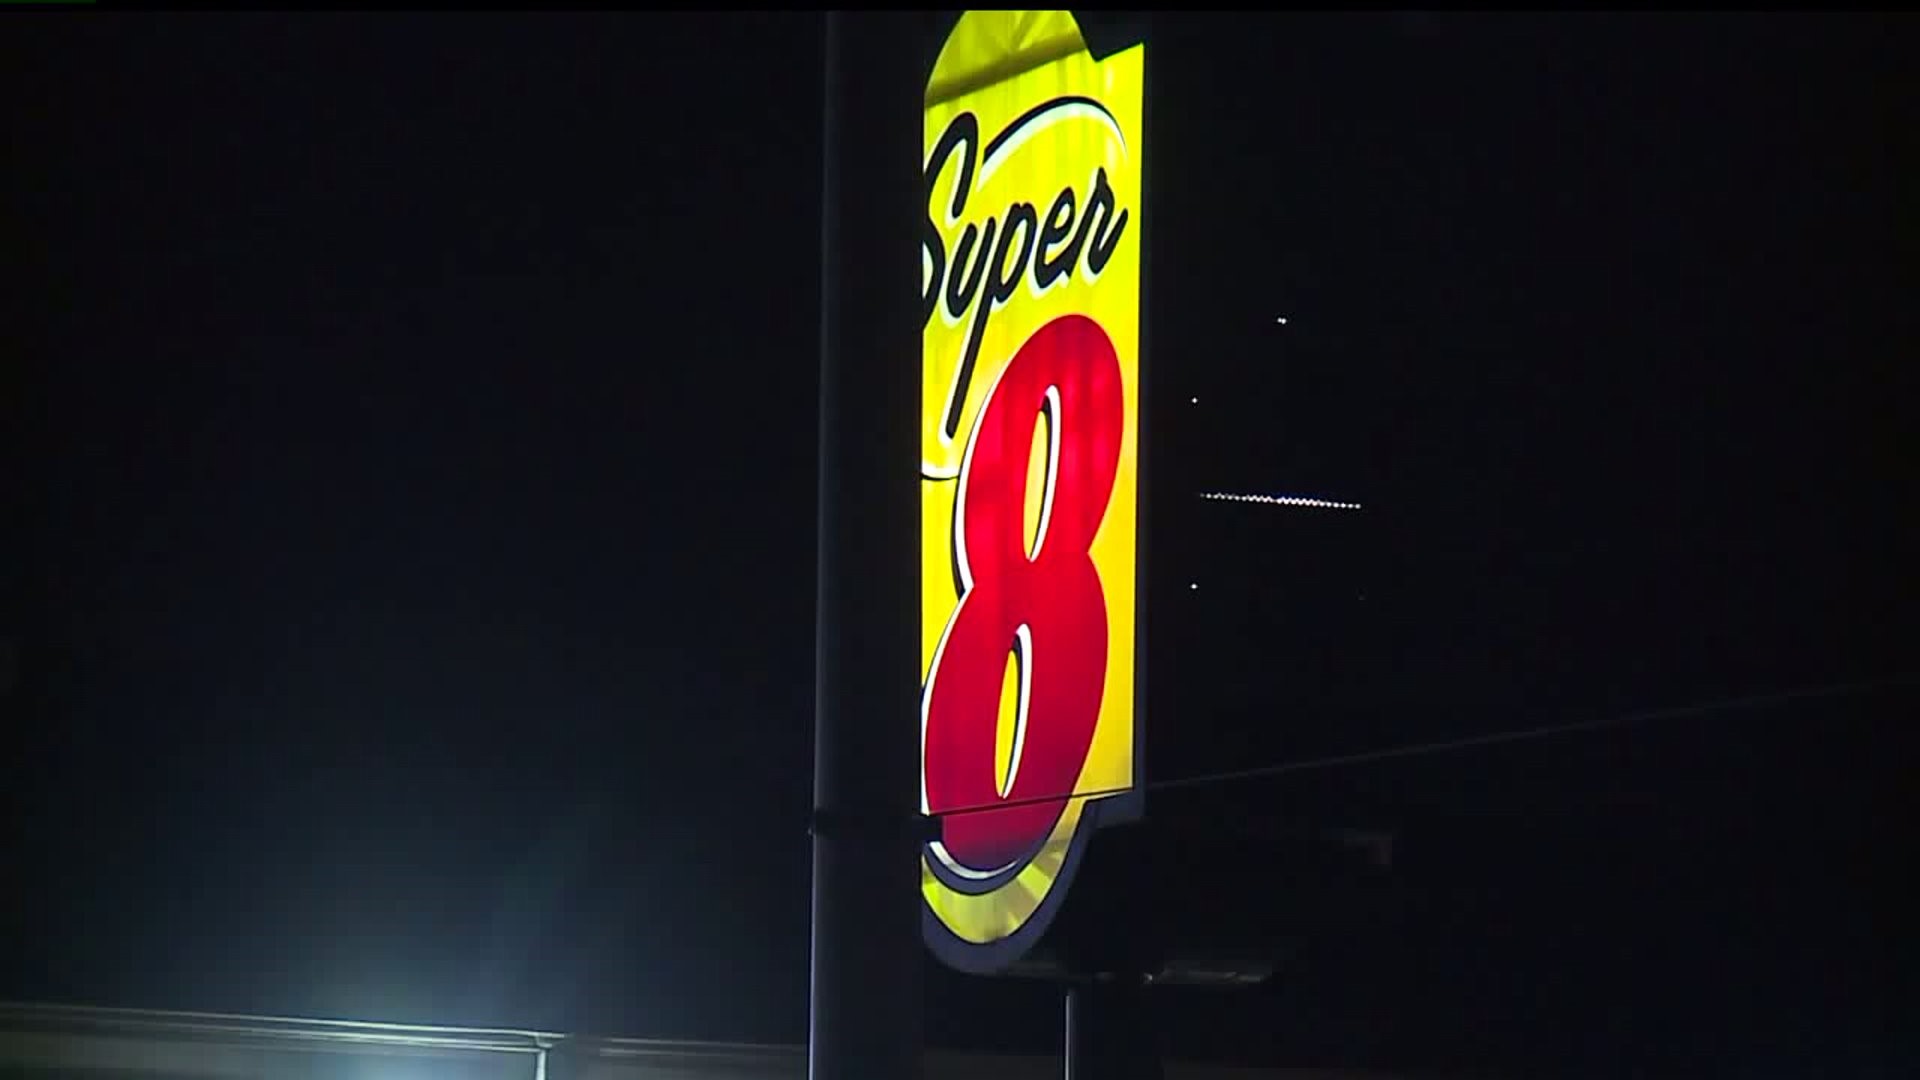 Police investigating after a man is kidnapped then shot at Super 8 Motel in York County